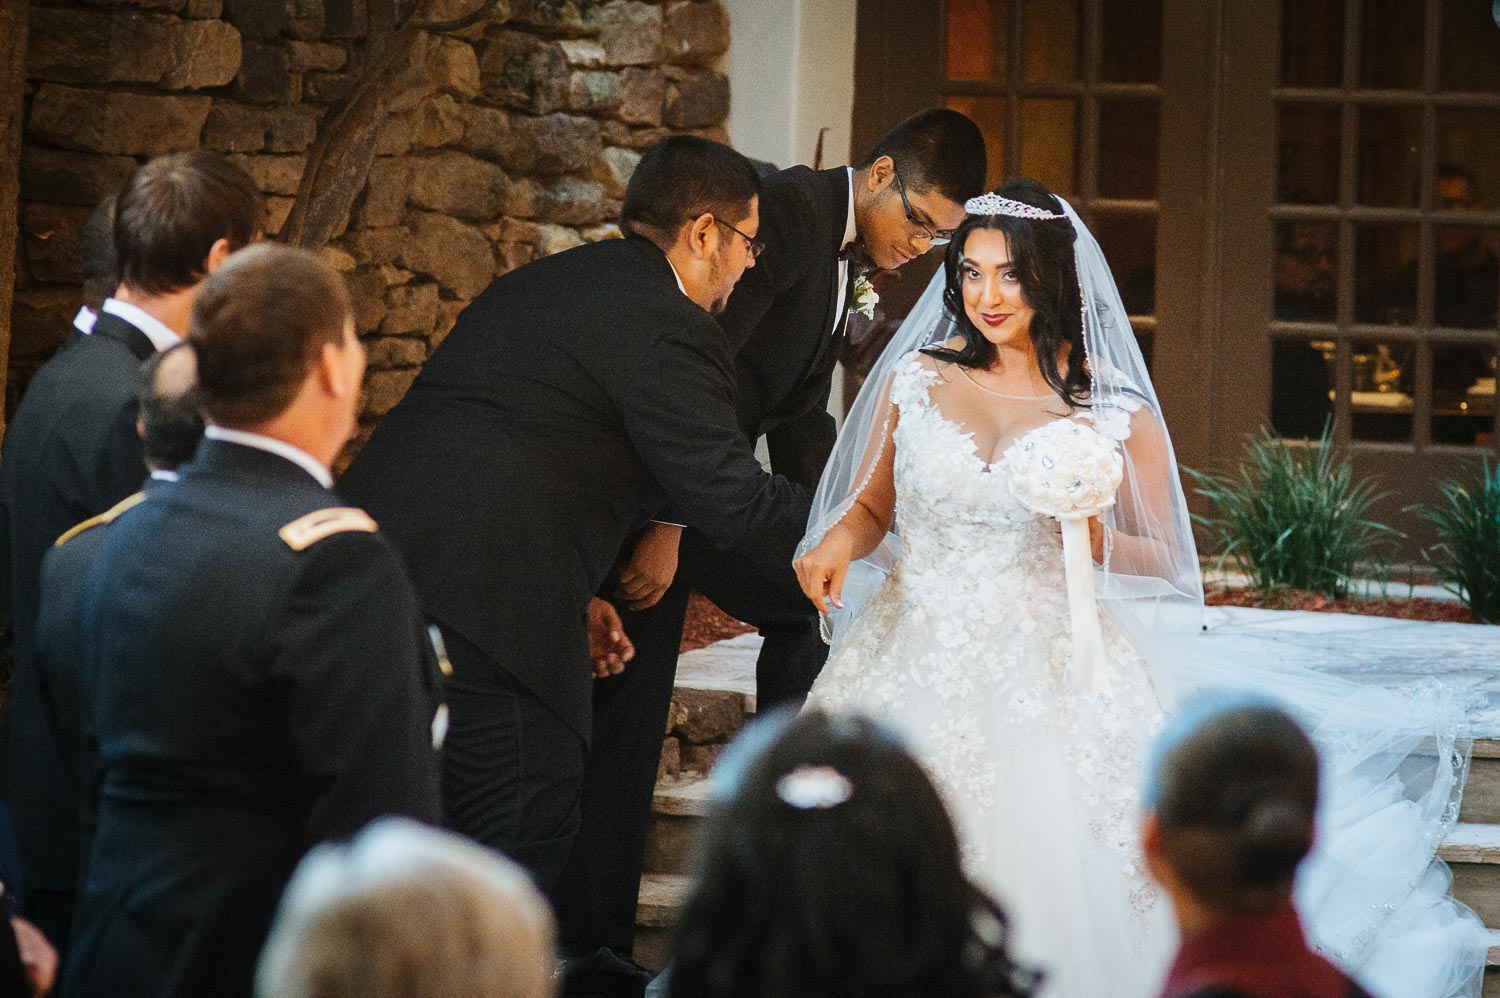 The look on the brides face of happiness as she views the groom at Omni La Mansion Riverwalk hotel in San Antonio Texas during a fall wedding 2019